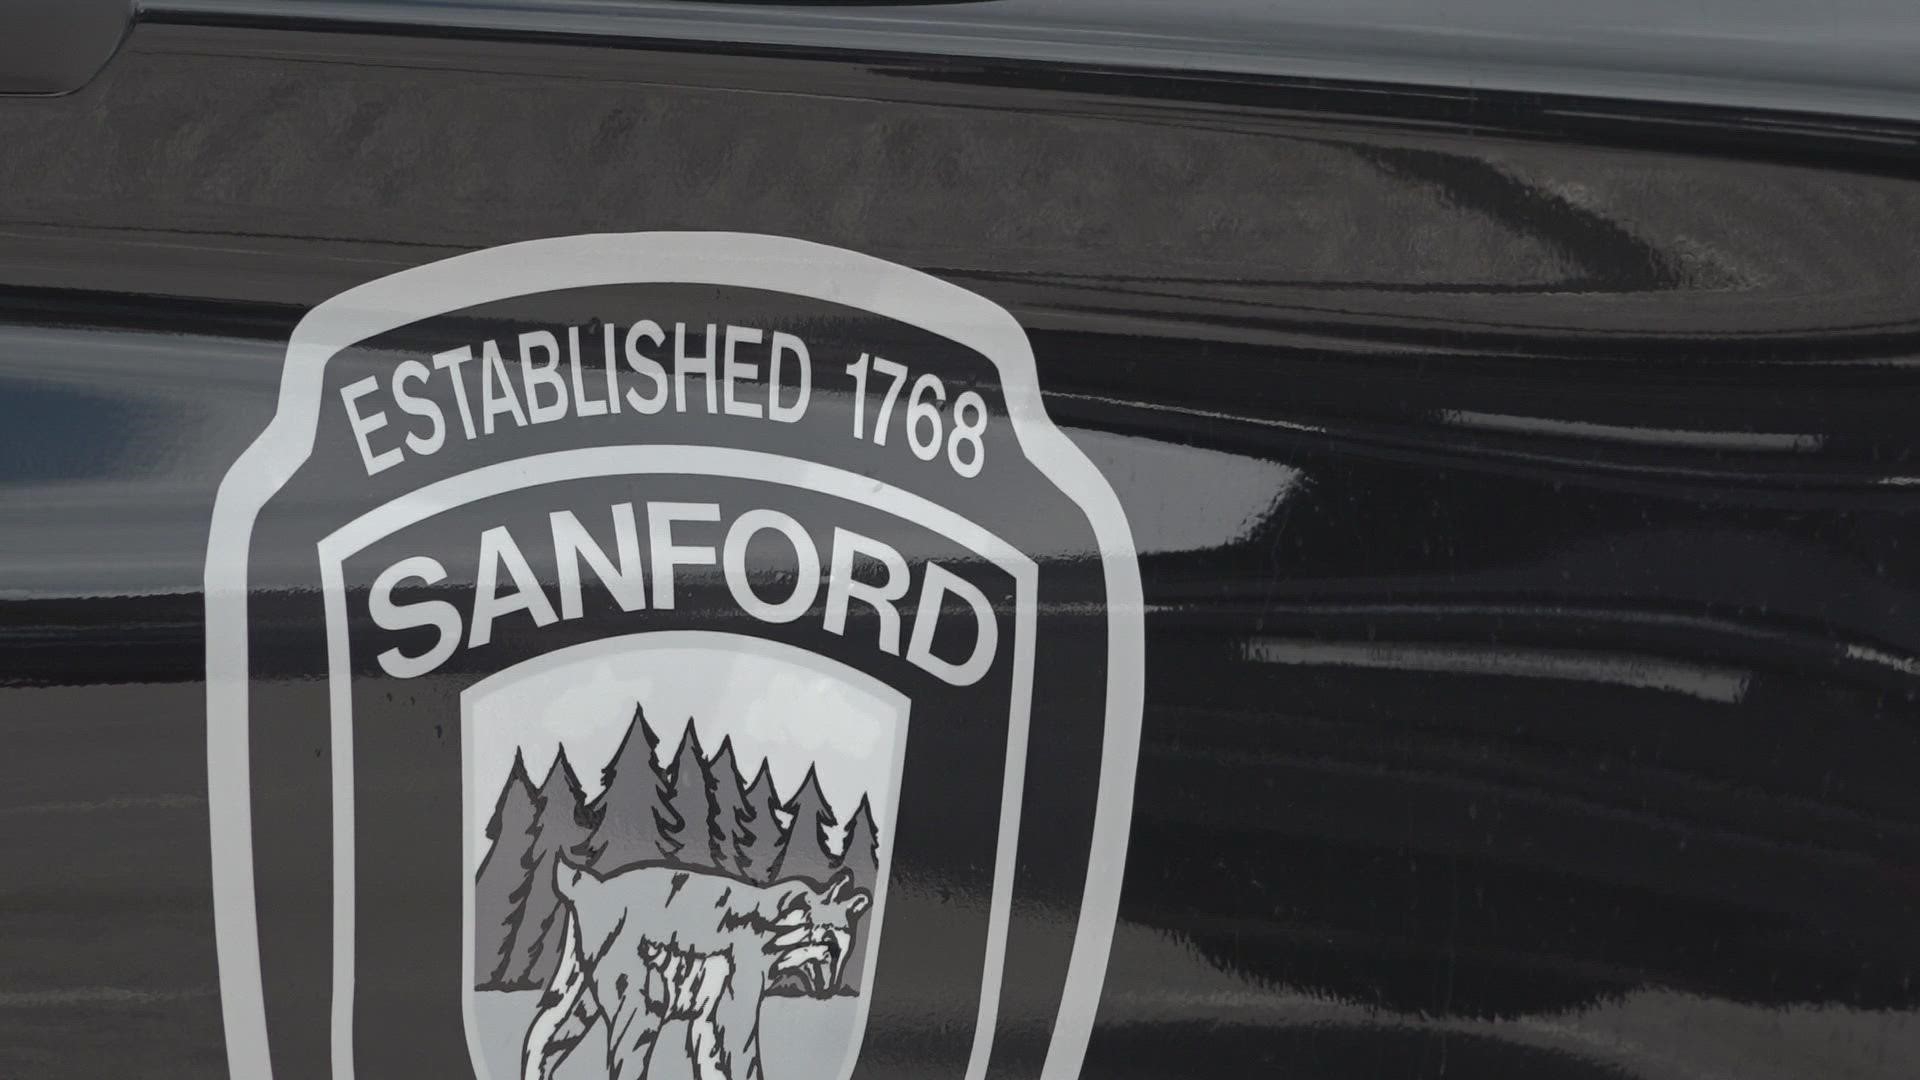 Colleen Adams, a community outreach officer for the Sanford Police Department's Mental Health Unit, said 281 people in York County have overdosed so far in 2022.